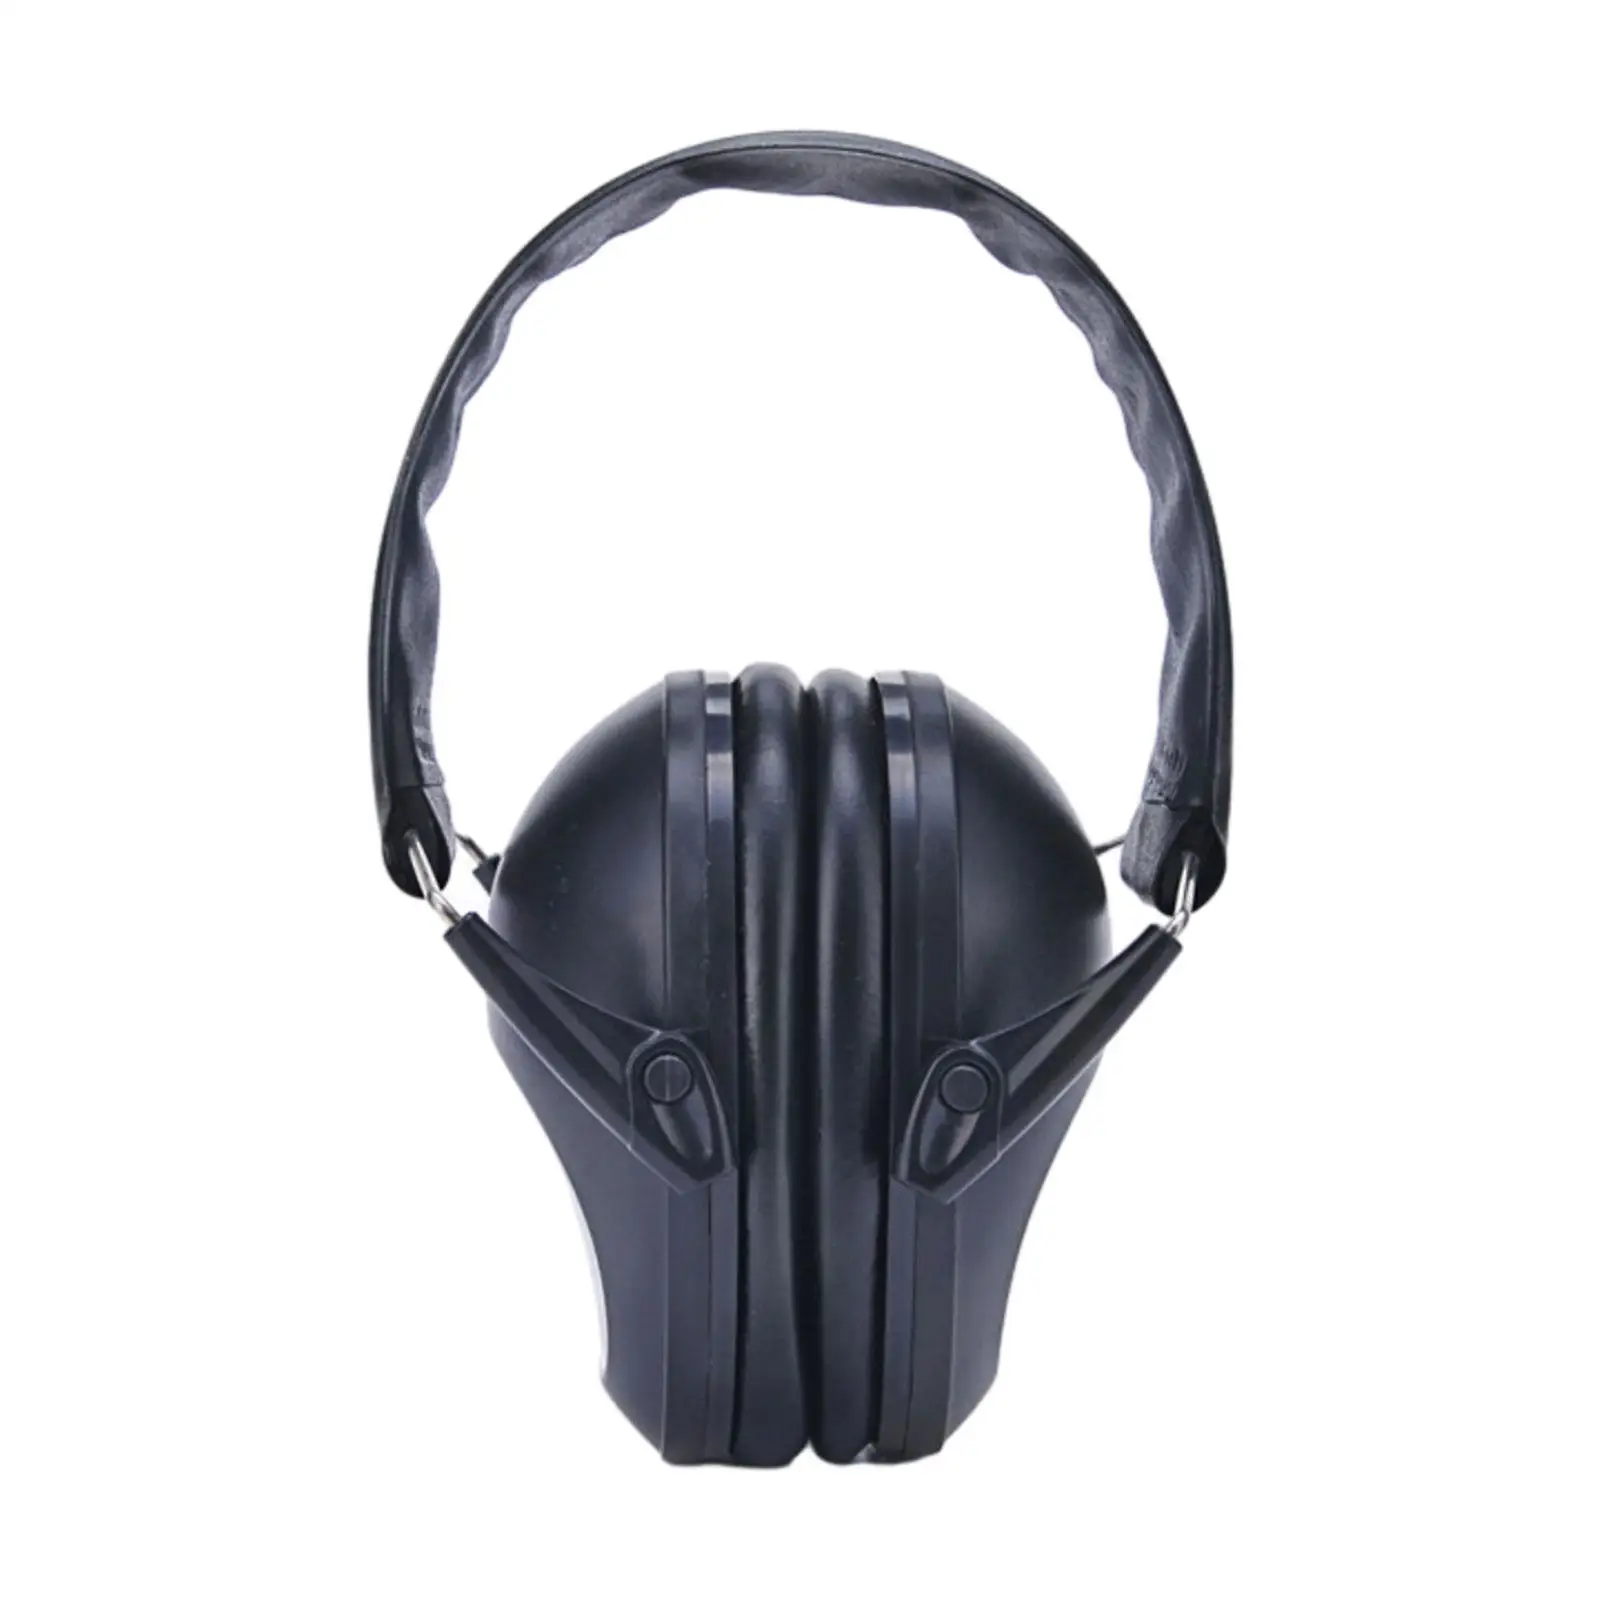 Ear Protector Noise Reduction Foldable Portable Lightweight Ear Defenders for Airplane Learning Wood Work Manufacturing Office